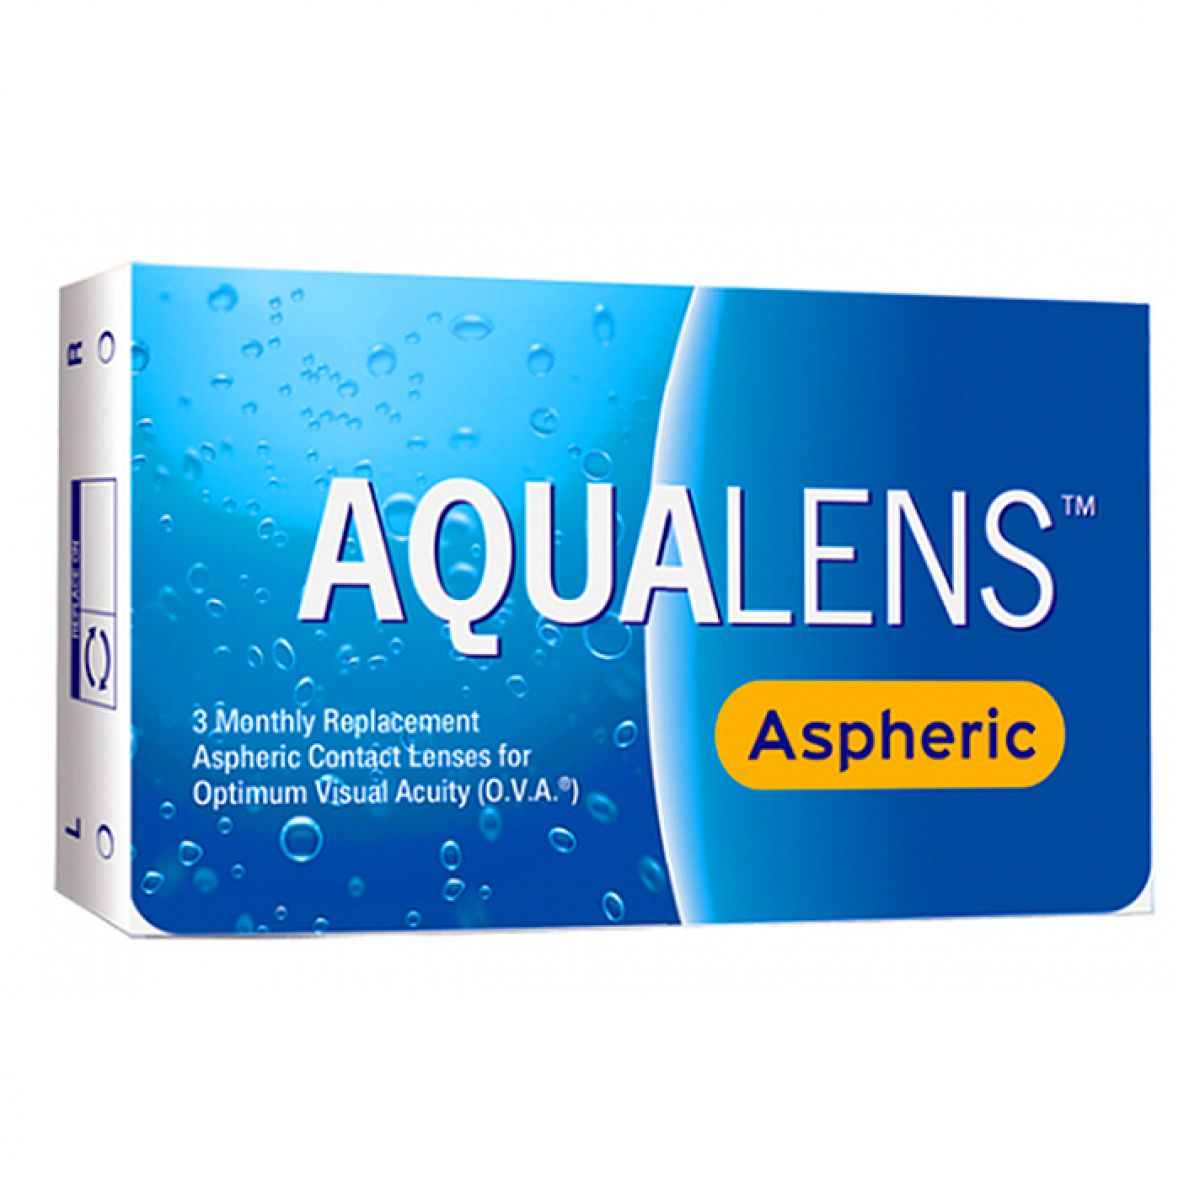 AQUALENS ASPHERIC MONTHLY DISPOSABLE CONTACT LENSES (3 LENSES)